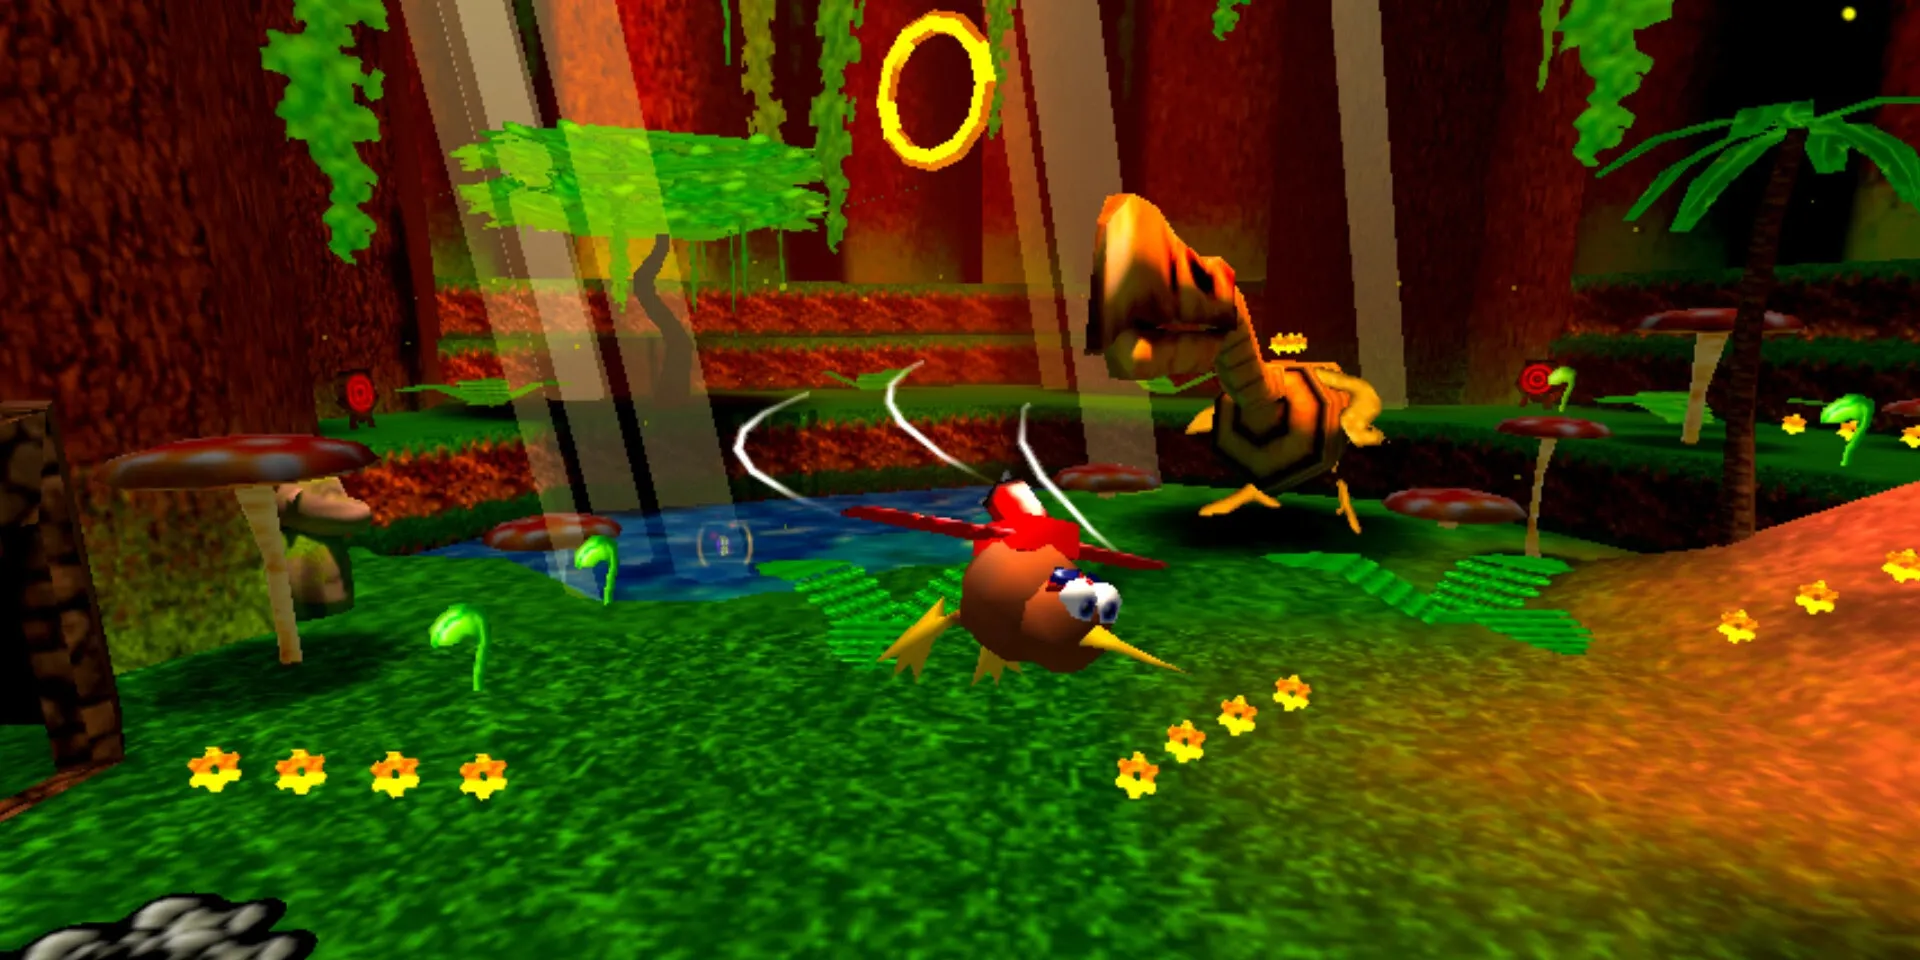 A kiwi flying around in a little jetpack around a Super Kiwi 64 stage